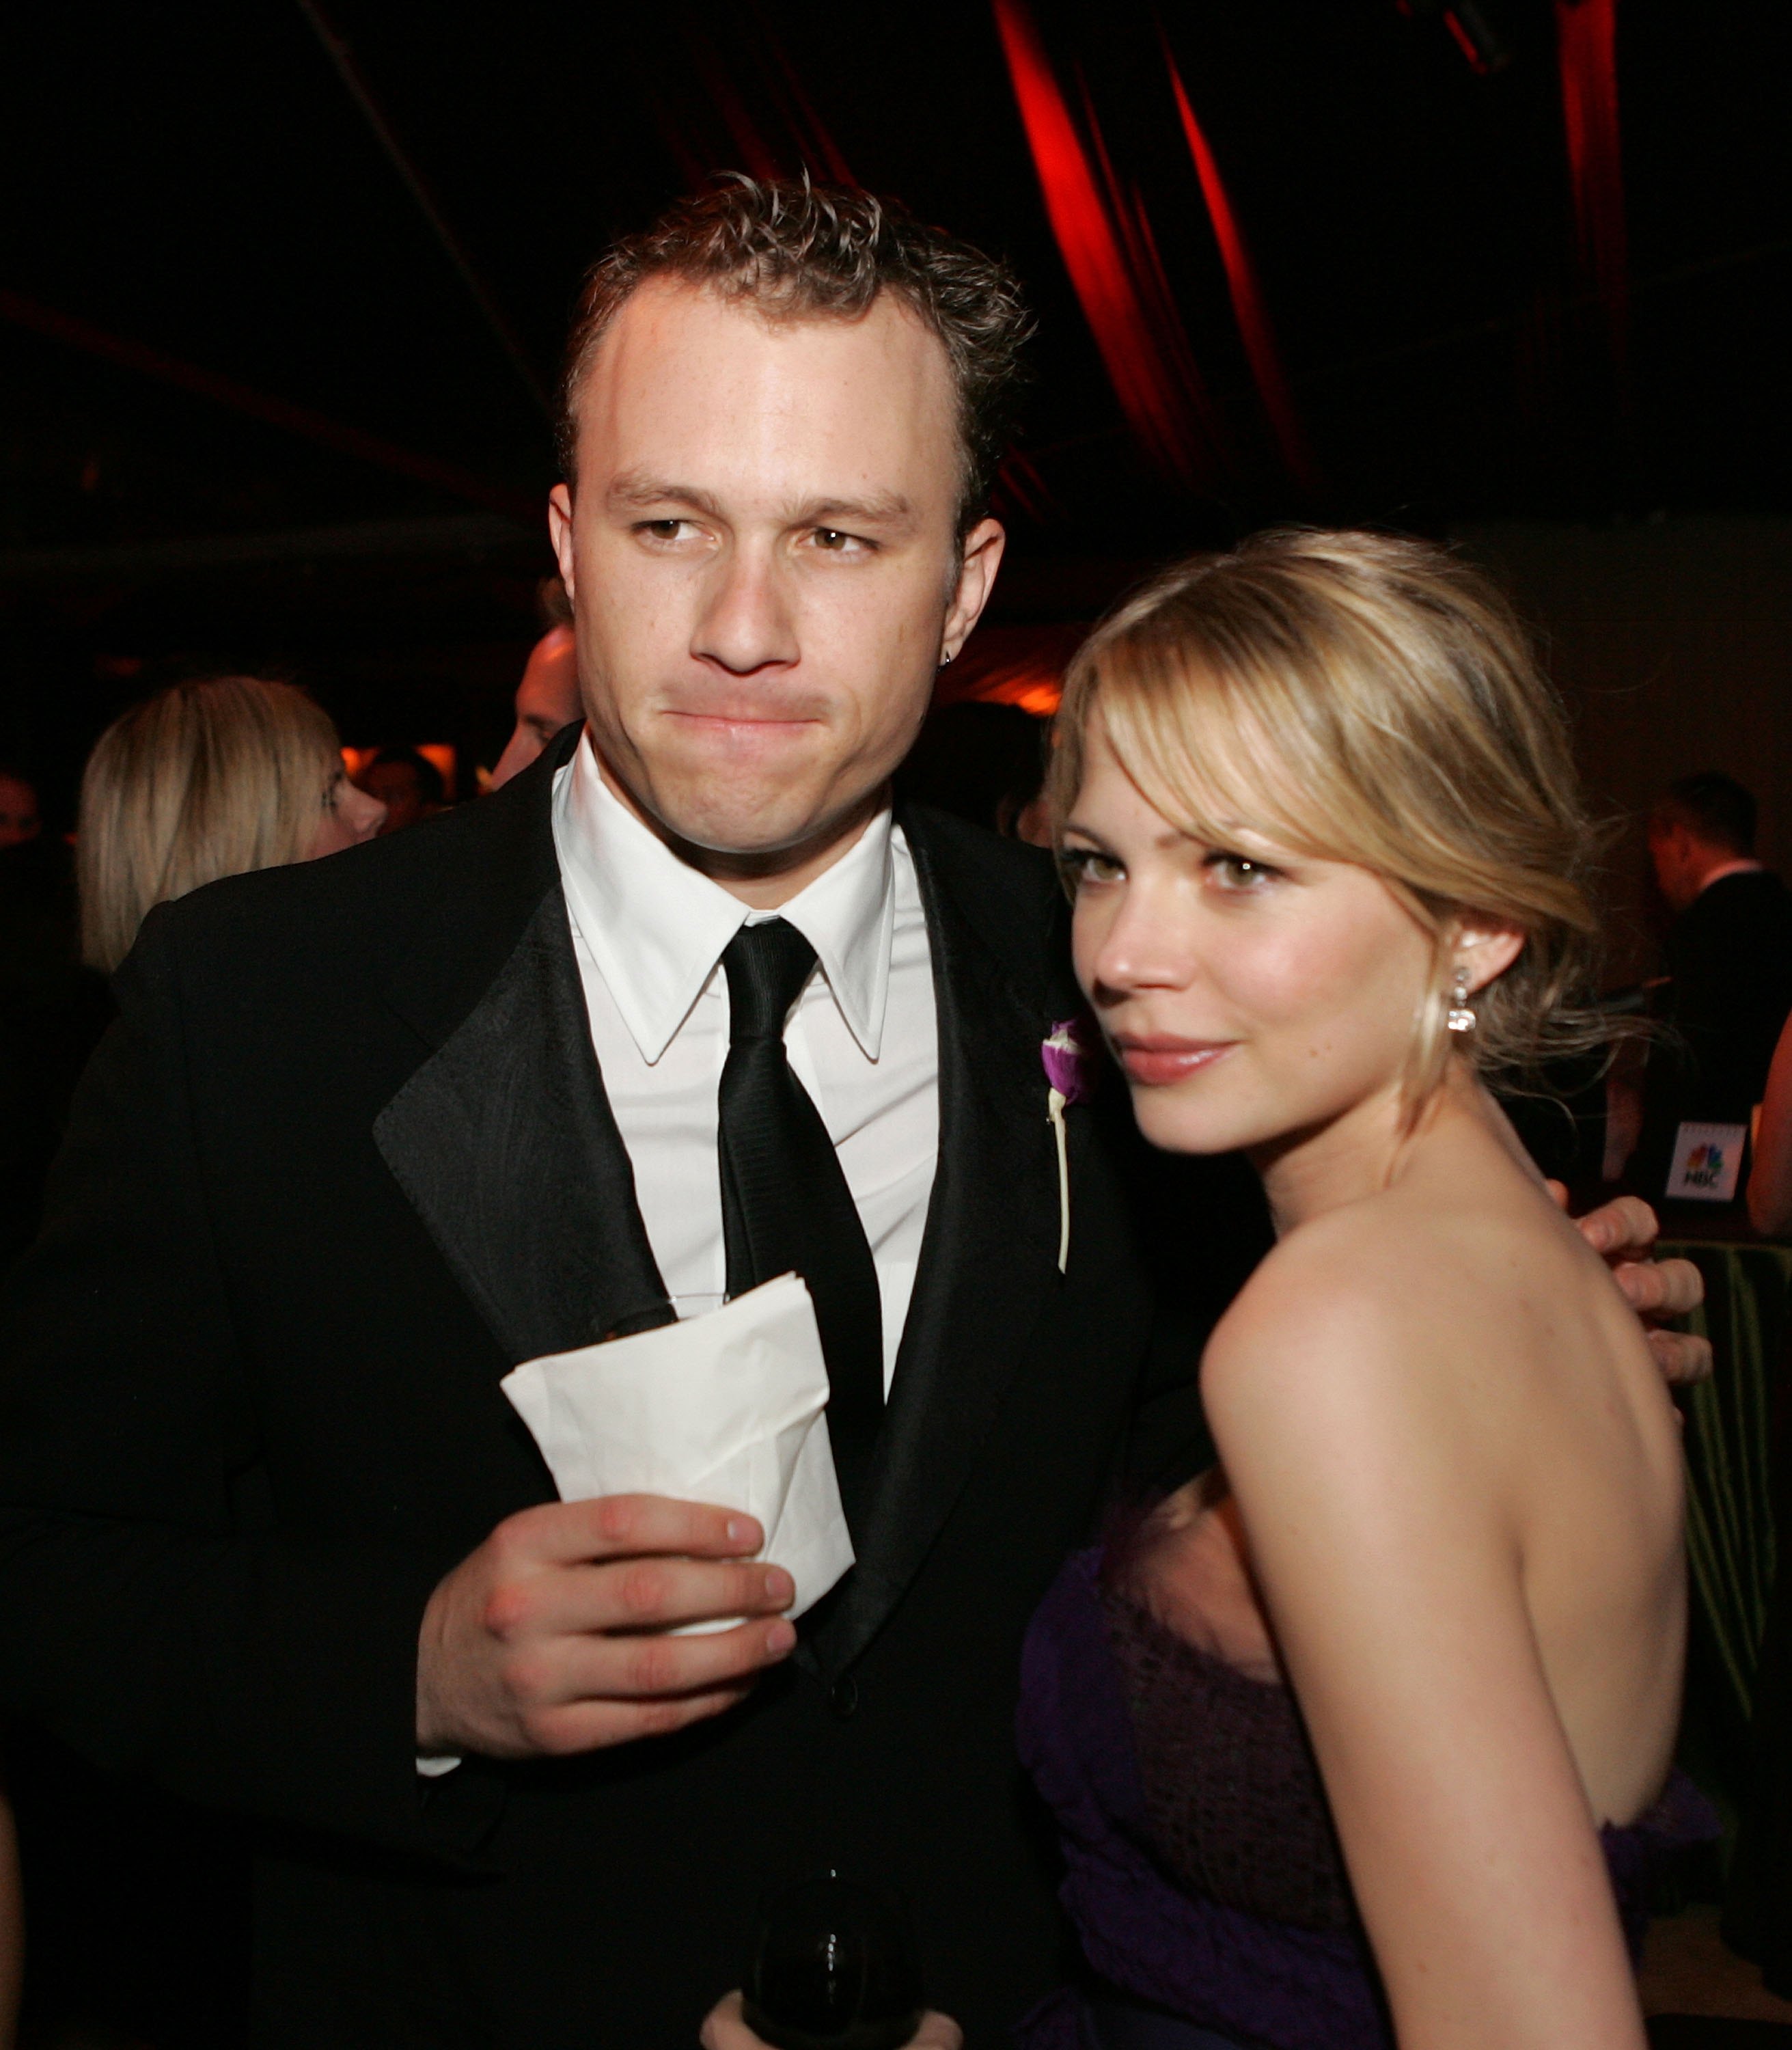 Heath Ledger and Michelle Williams at the Universal/NBC/Focus Features Golden Globe after party in Beverly Hills, California on January 16, 2006 | Source: Getty Images